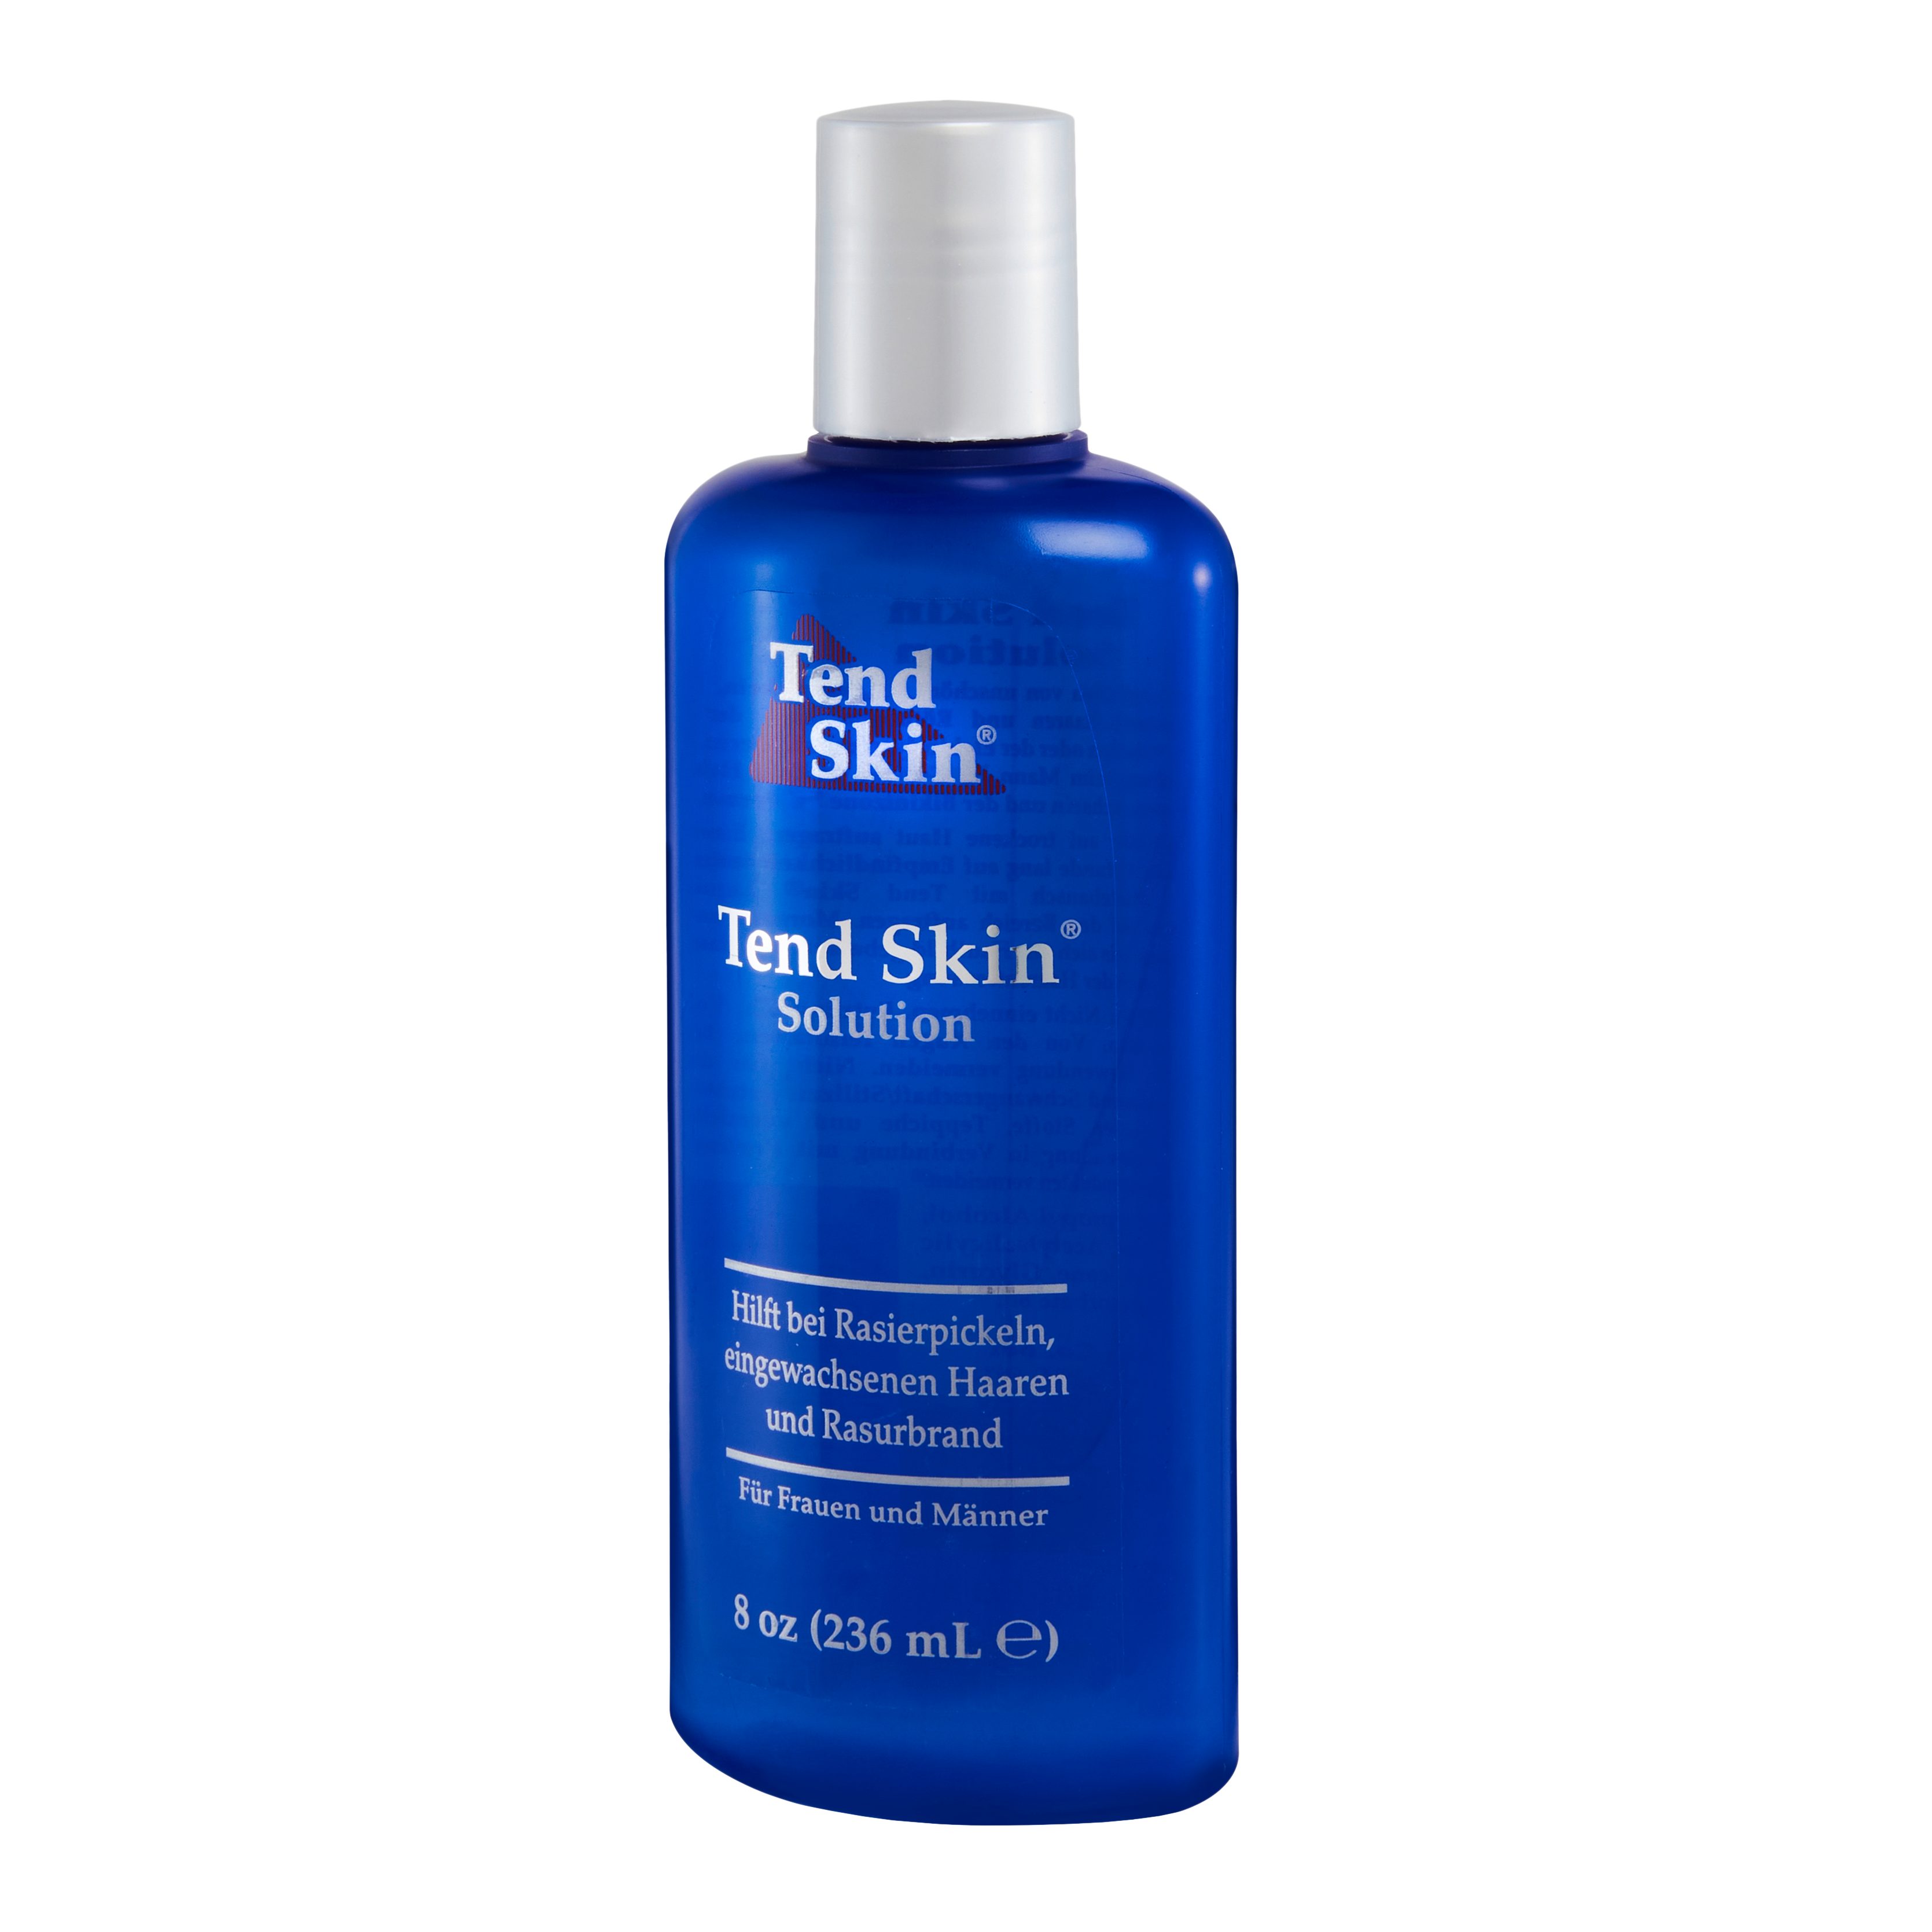 Tend Skin After-Shave Solution 236ml